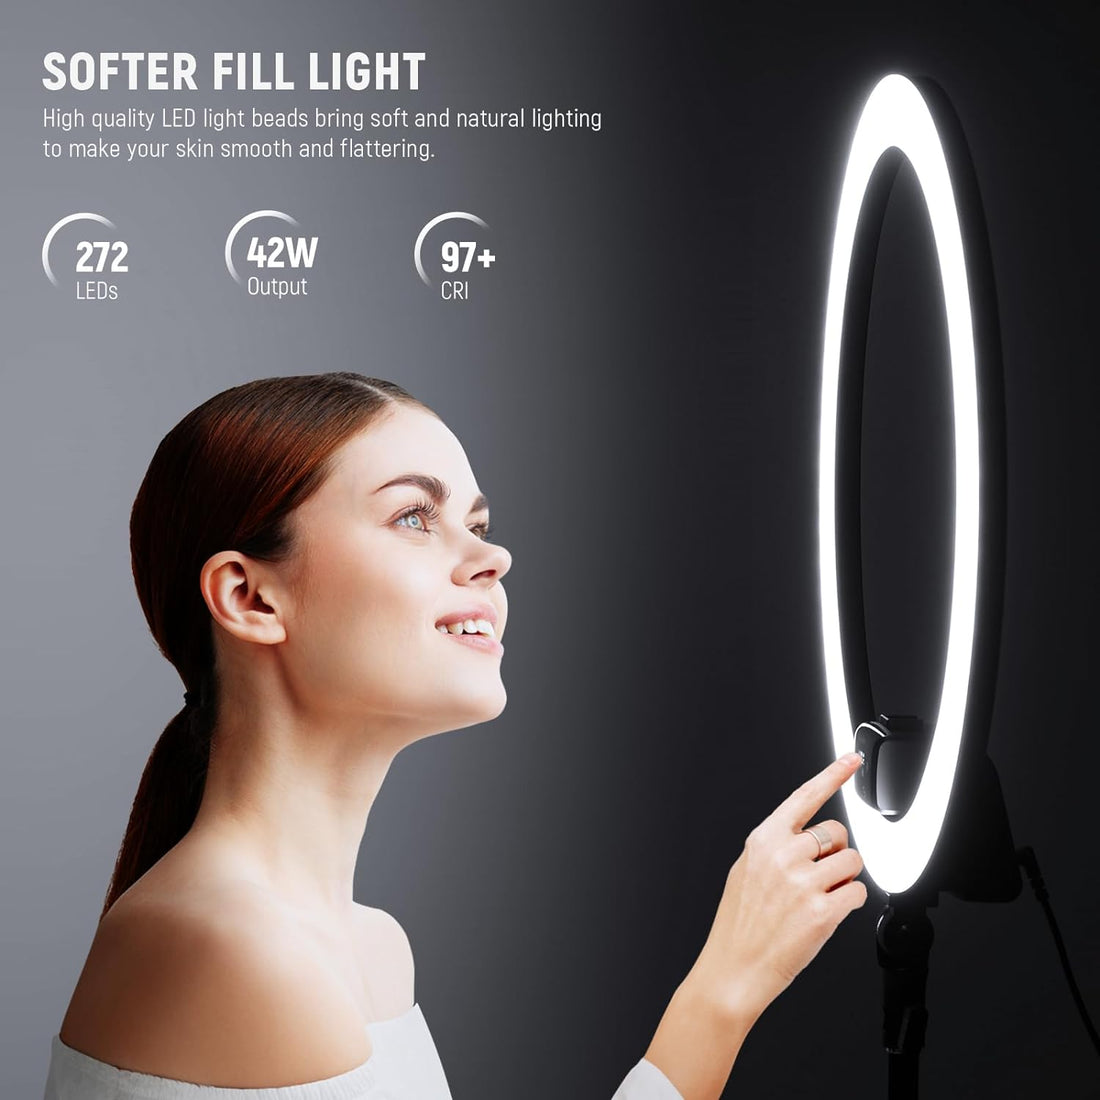 Neewer Advanced 18-inch LED Ring Light Support Manual Touch Control with LCD Screen, 2.4G Remote and Multiple Lights Control, 3200-5600K, Stand Included for Makeup YouTube Video Blogger Salon (Black)